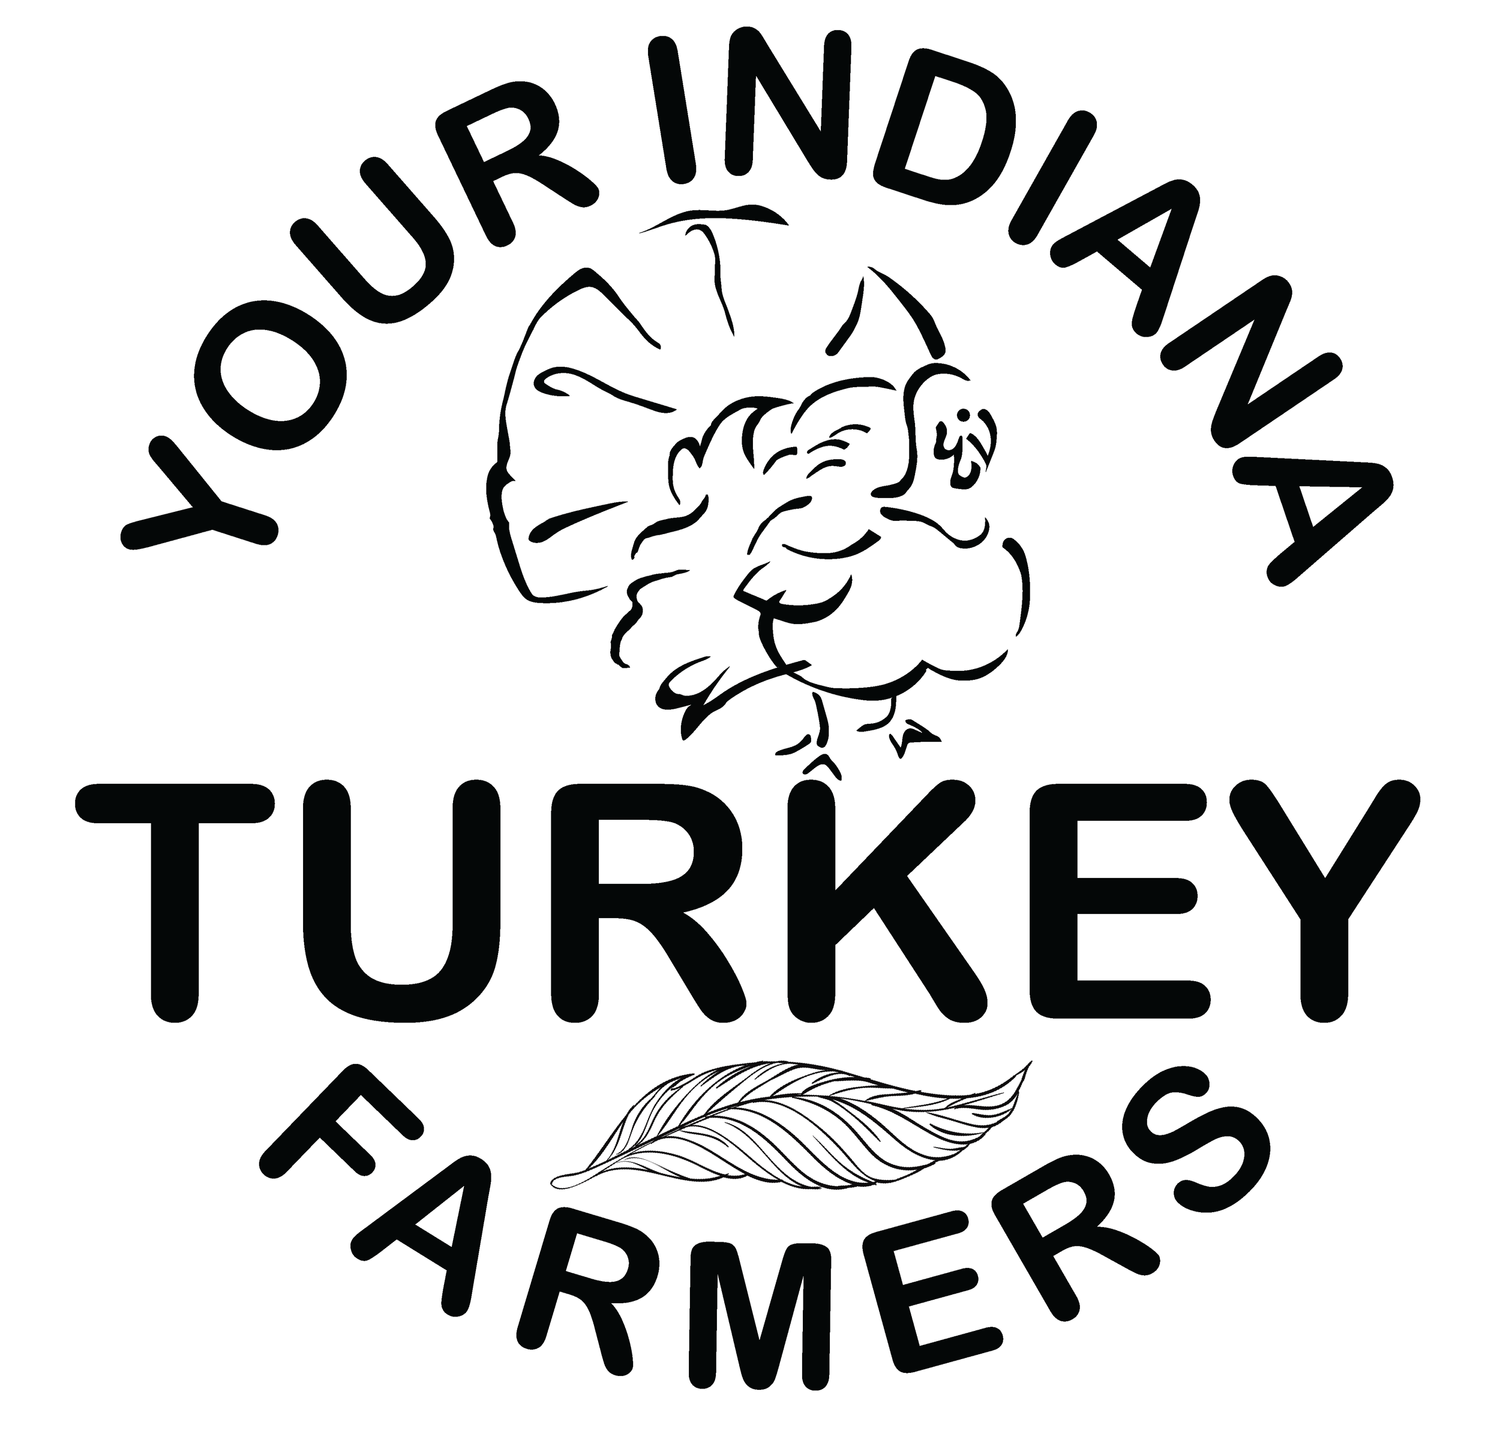 Your Indiana Turkey Farmers presents